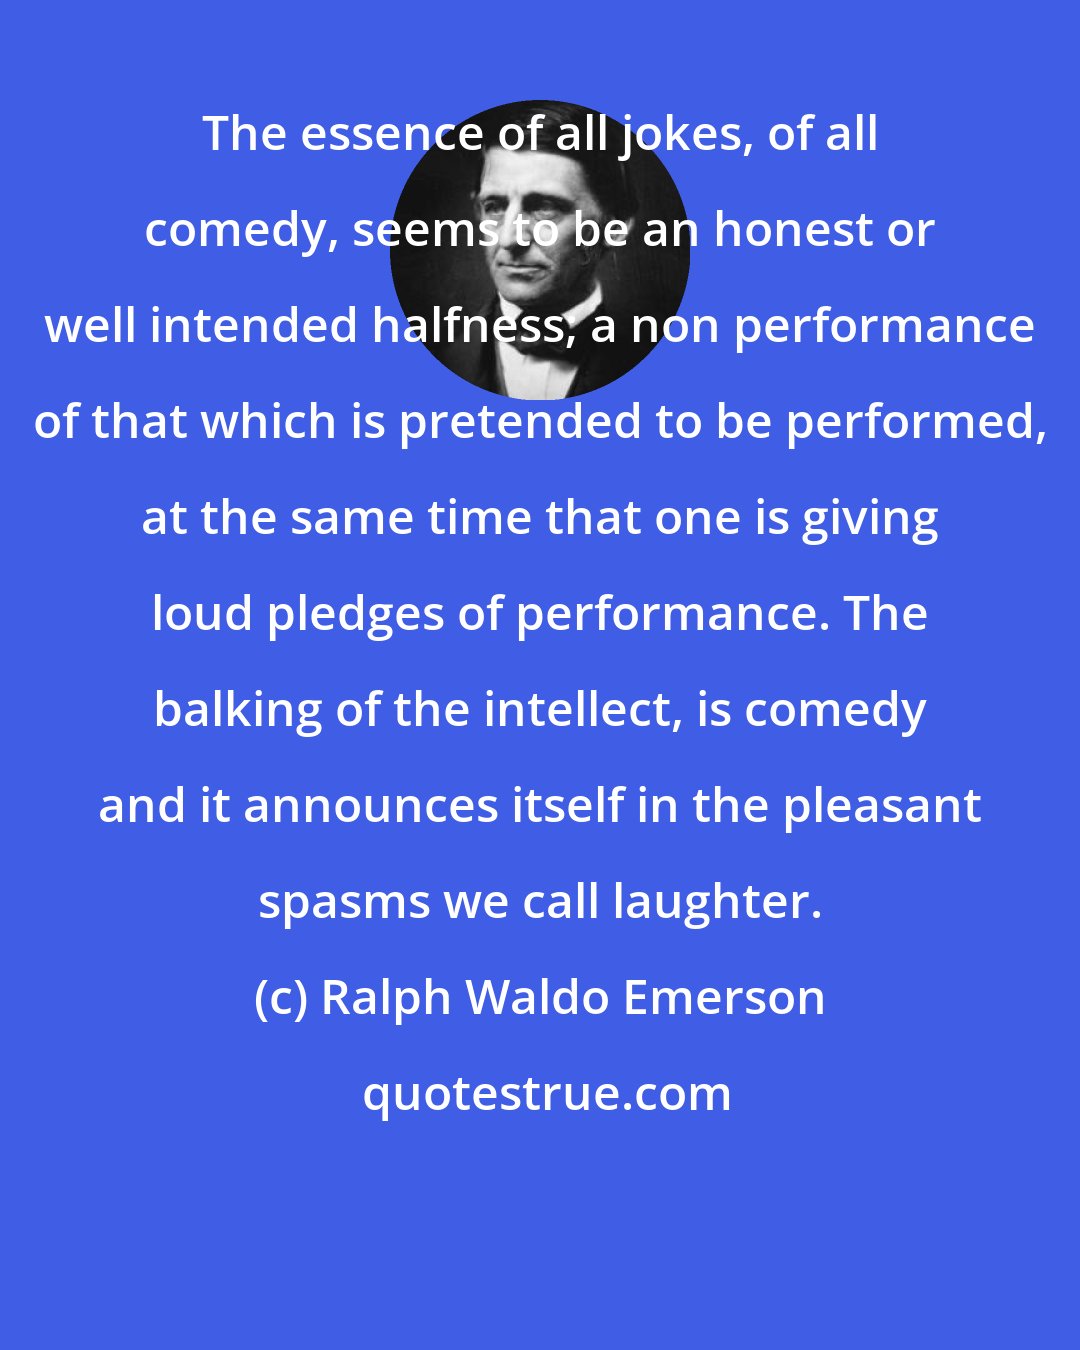 Ralph Waldo Emerson: The essence of all jokes, of all comedy, seems to be an honest or well intended halfness; a non performance of that which is pretended to be performed, at the same time that one is giving loud pledges of performance. The balking of the intellect, is comedy and it announces itself in the pleasant spasms we call laughter.